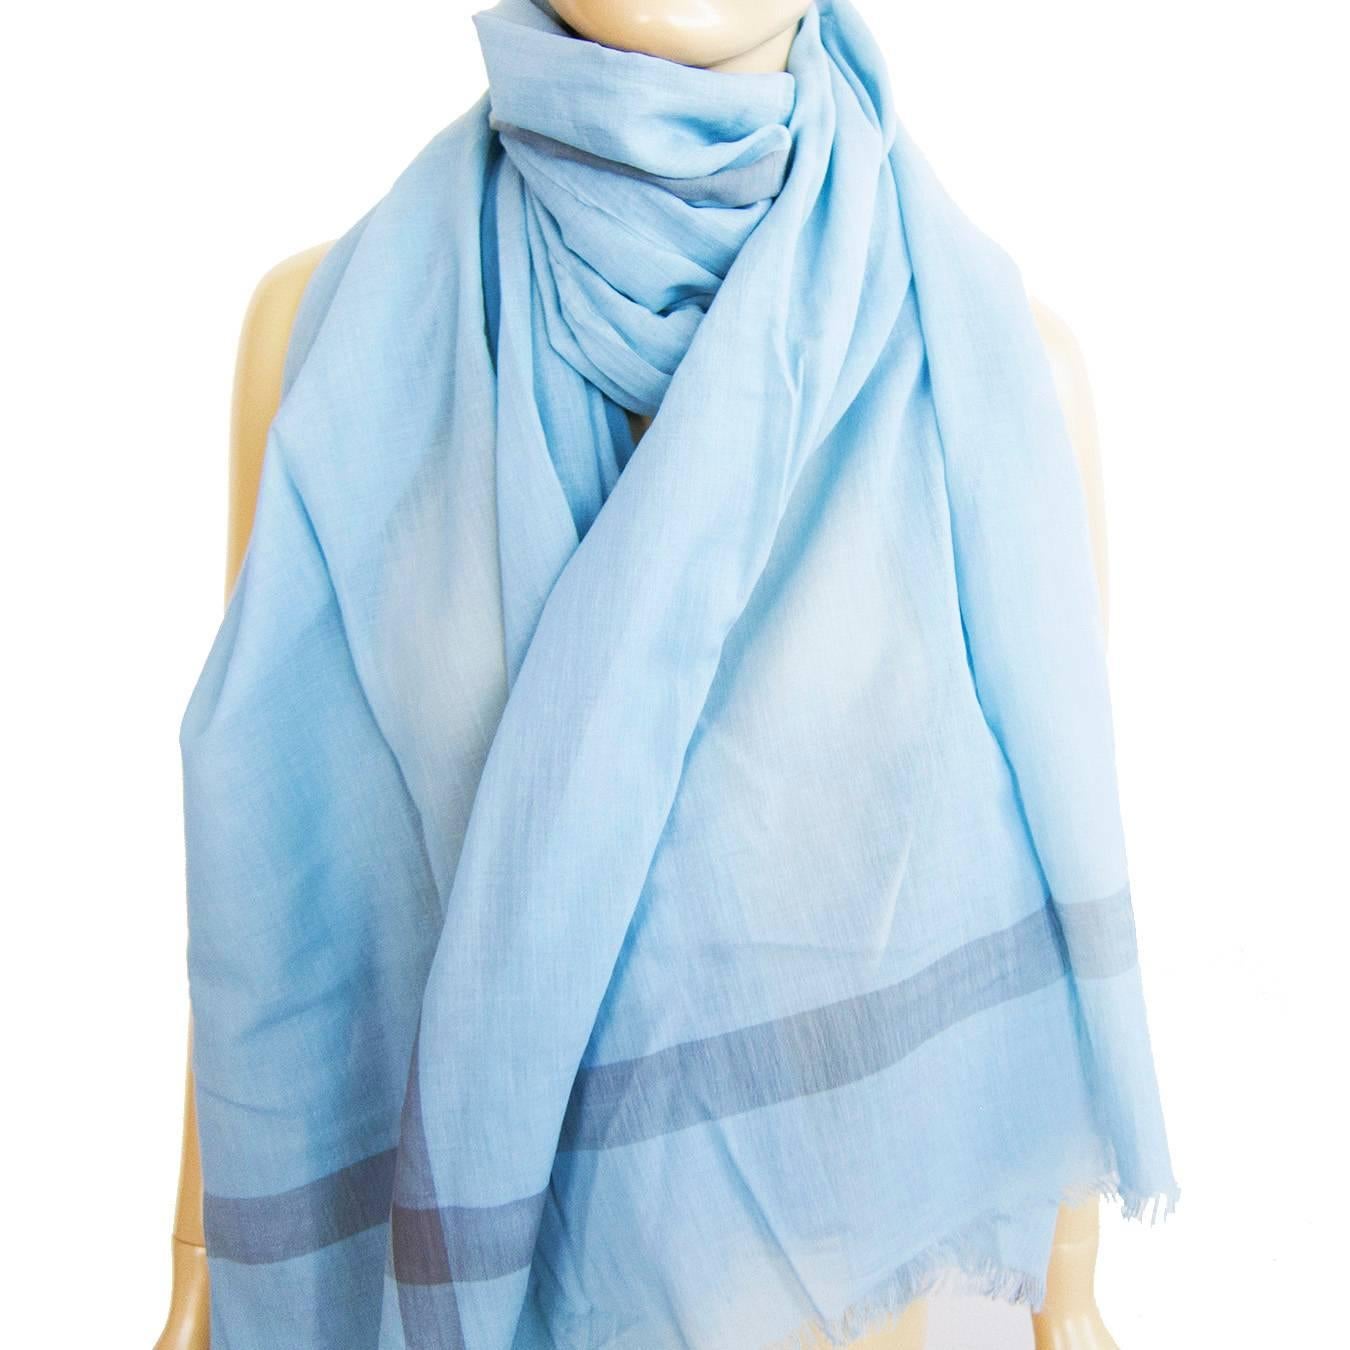 Hermes Blue Cotton Shawl Stole Perfect for Summer
Store fresh.  Pristine condition.
Fine women's rectangular cotton shawl.
The material is incredible, fluid, light, very refined
Perfect gift coming with signature orange Hermes box.
Measures 100